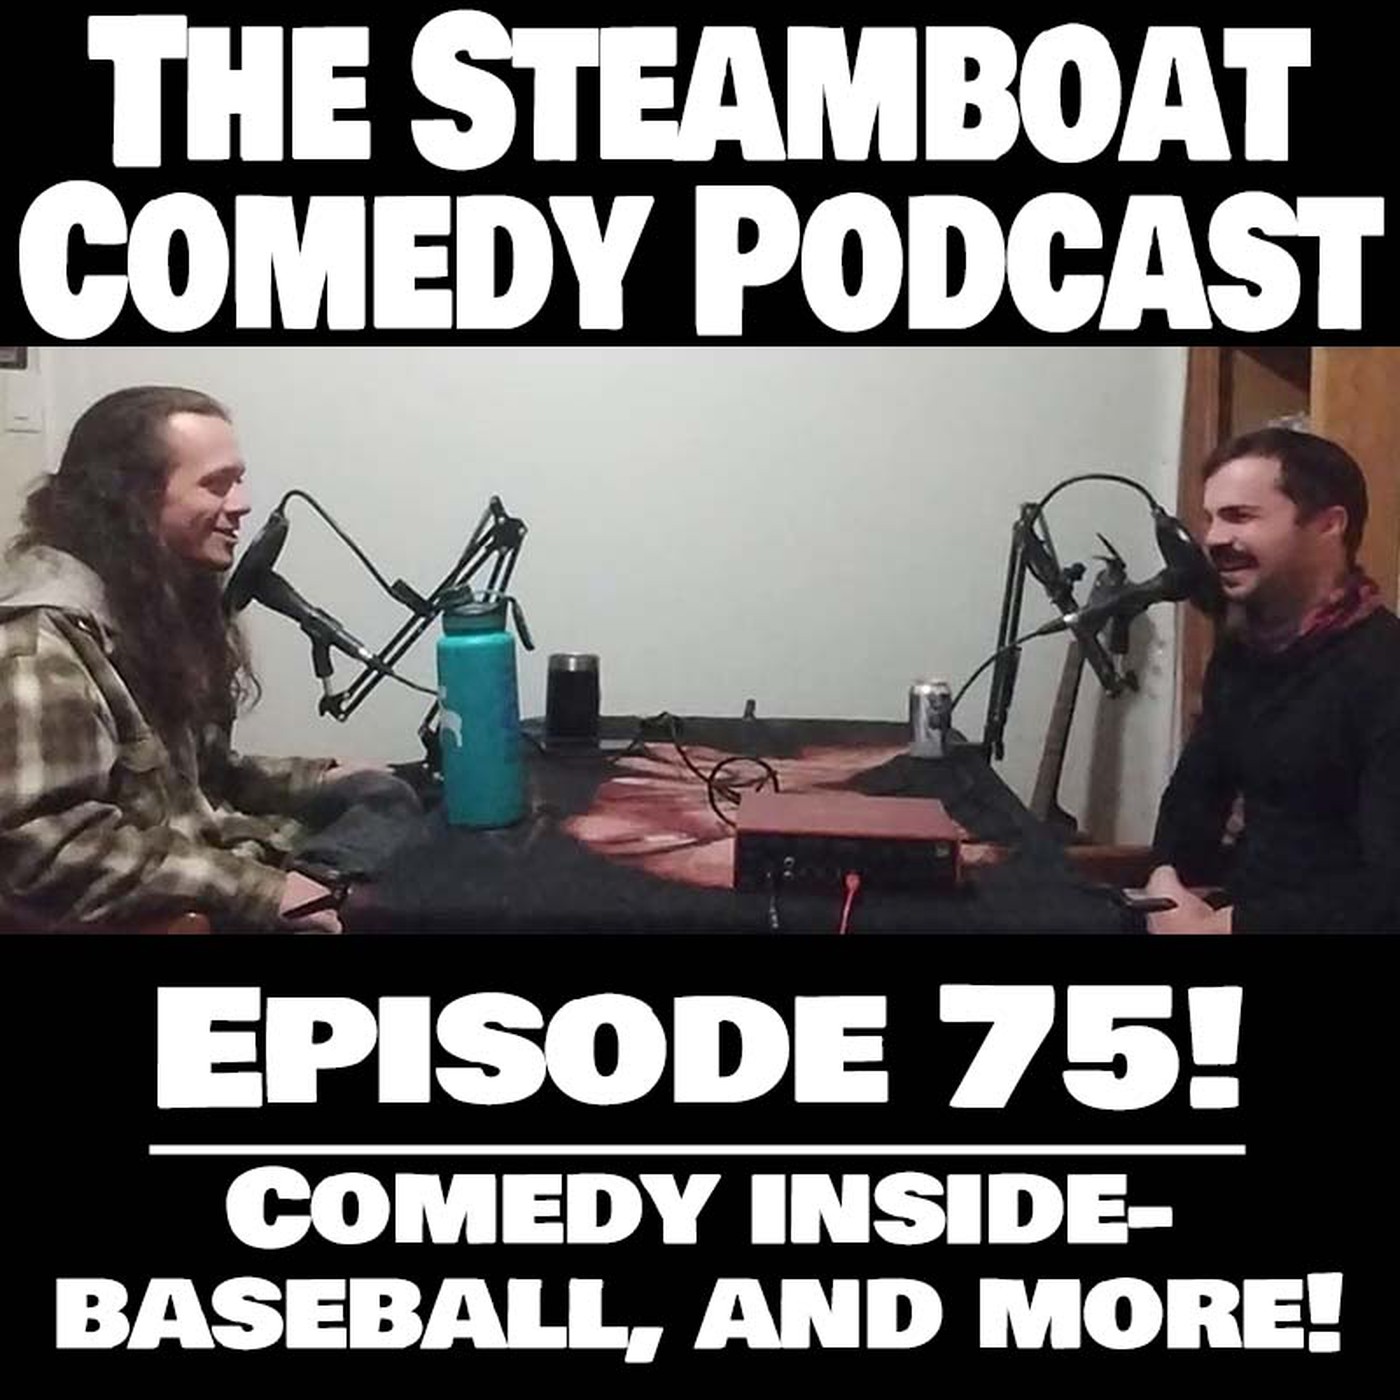 Episode 75! Comedy inside-baseball, and more!